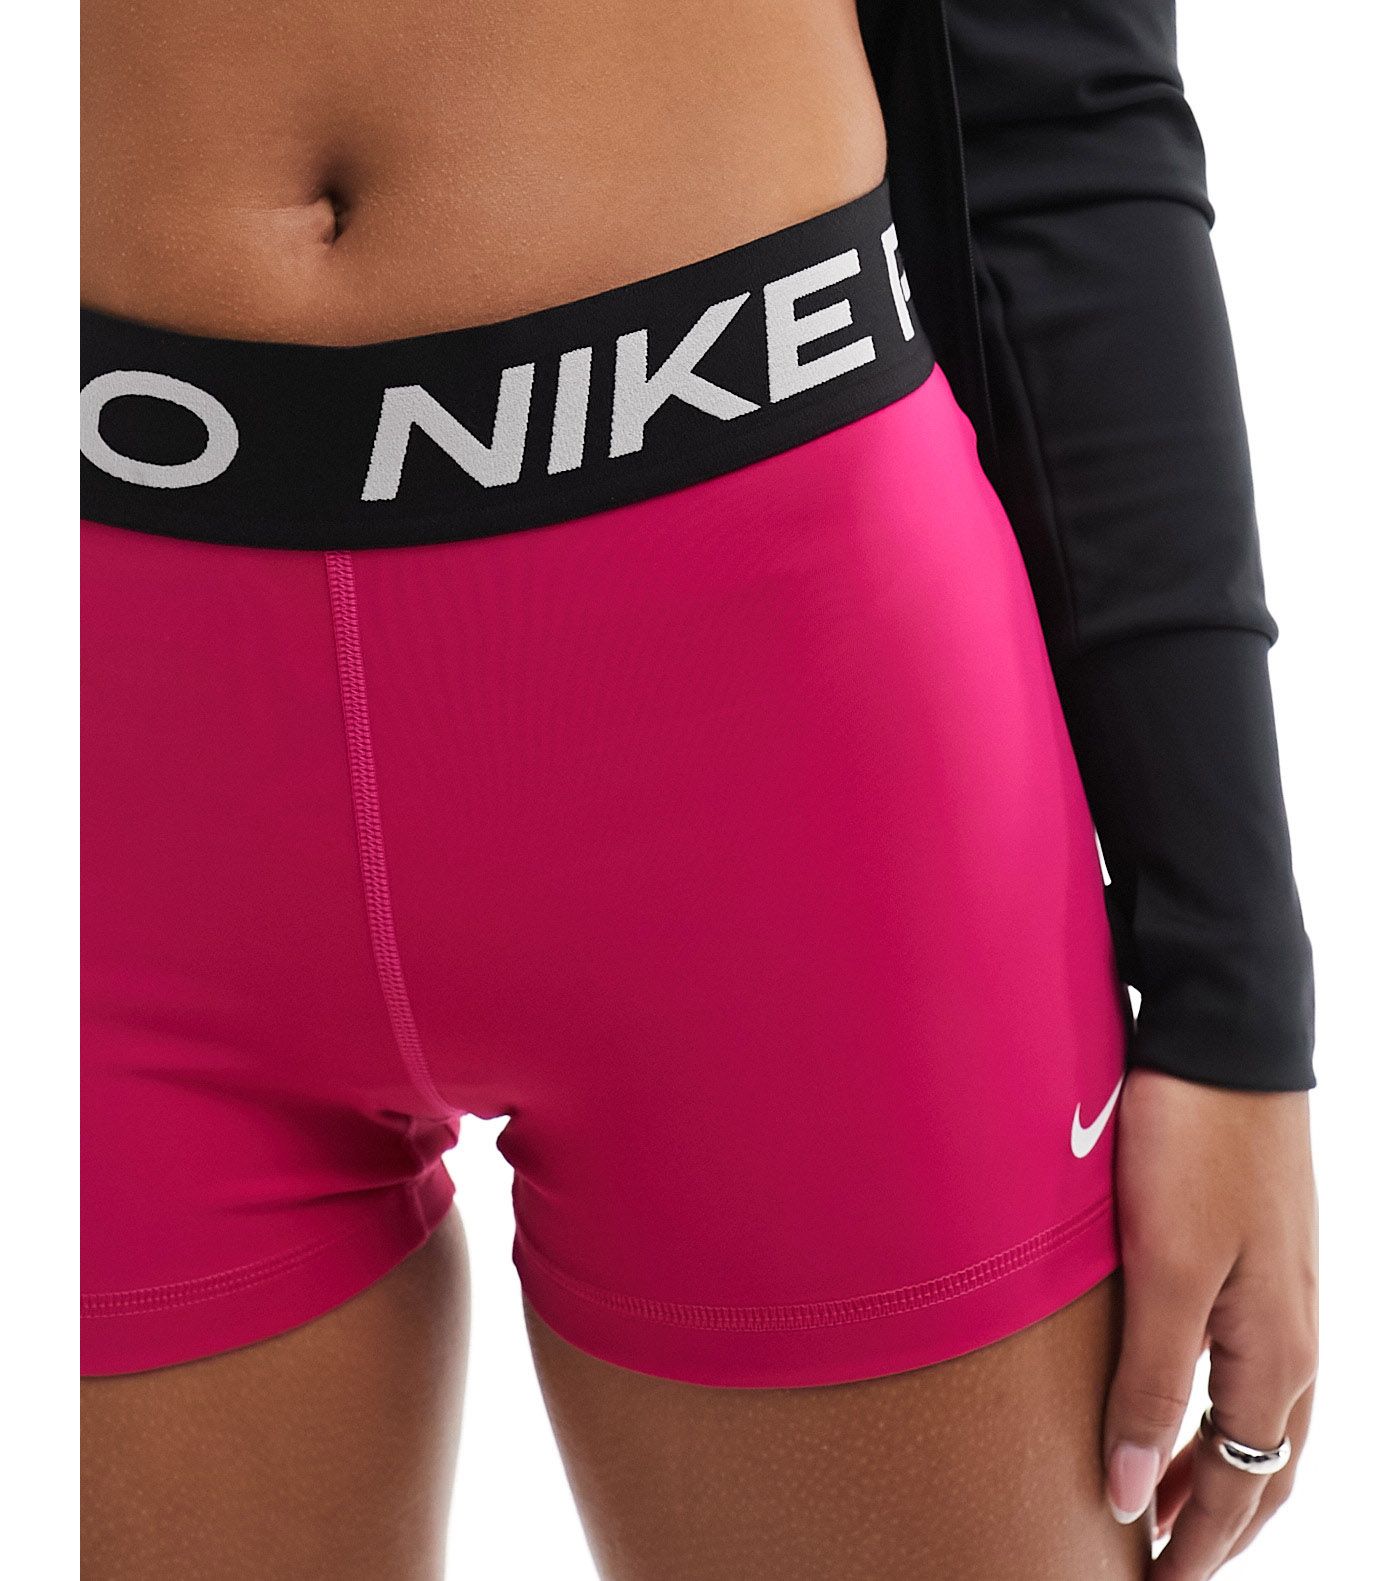 Nike Pro Training Dri-Fit 5 inch shorts in fireberry pink